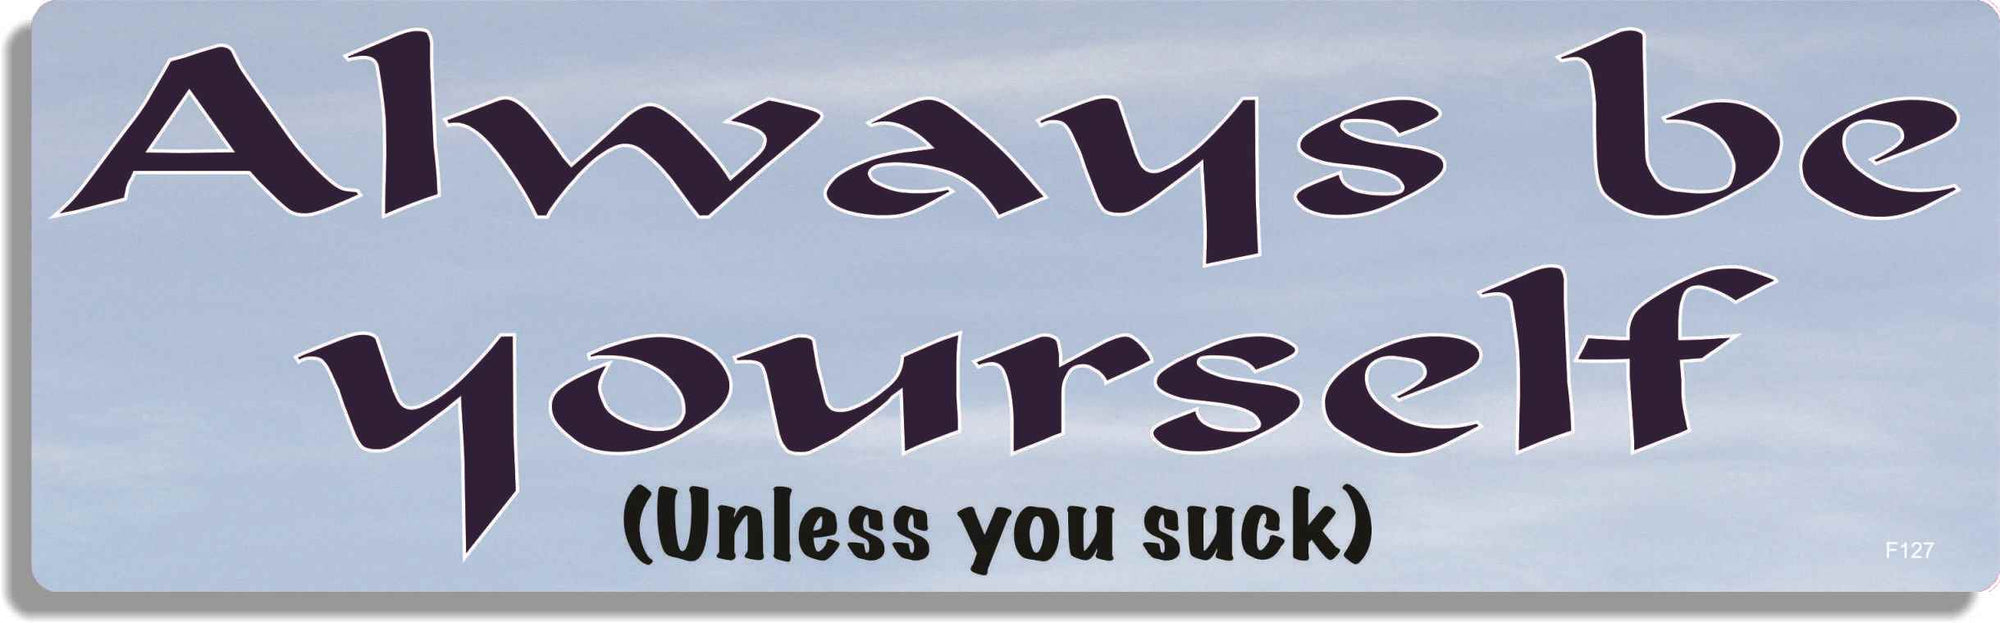 Always be yourself (Unless you suck) - 3" x 10" Bumper Sticker--Car Magnet- -  Decal Bumper Sticker-funny Bumper Sticker Car Magnet Always be yourself (Unless you suck)-  Decal for cars funny, funny quote, funny saying